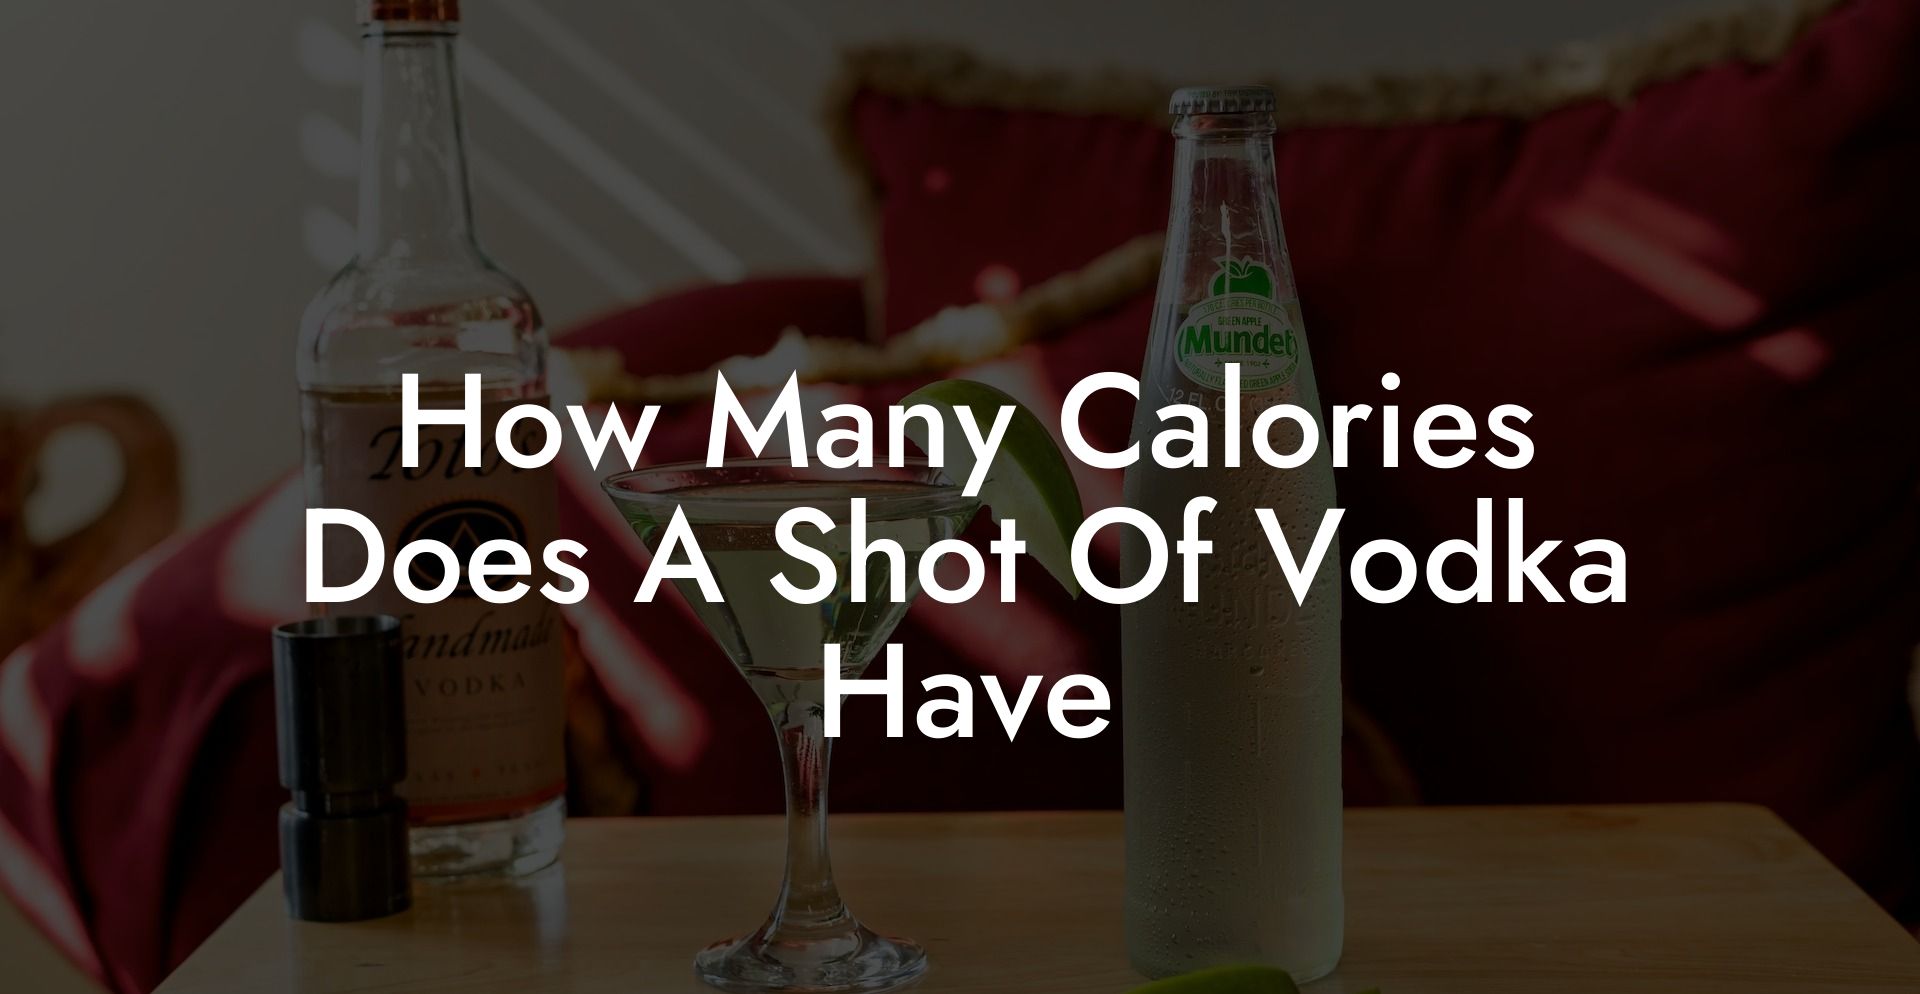 How Many Calories Does A Shot Of Vodka Have